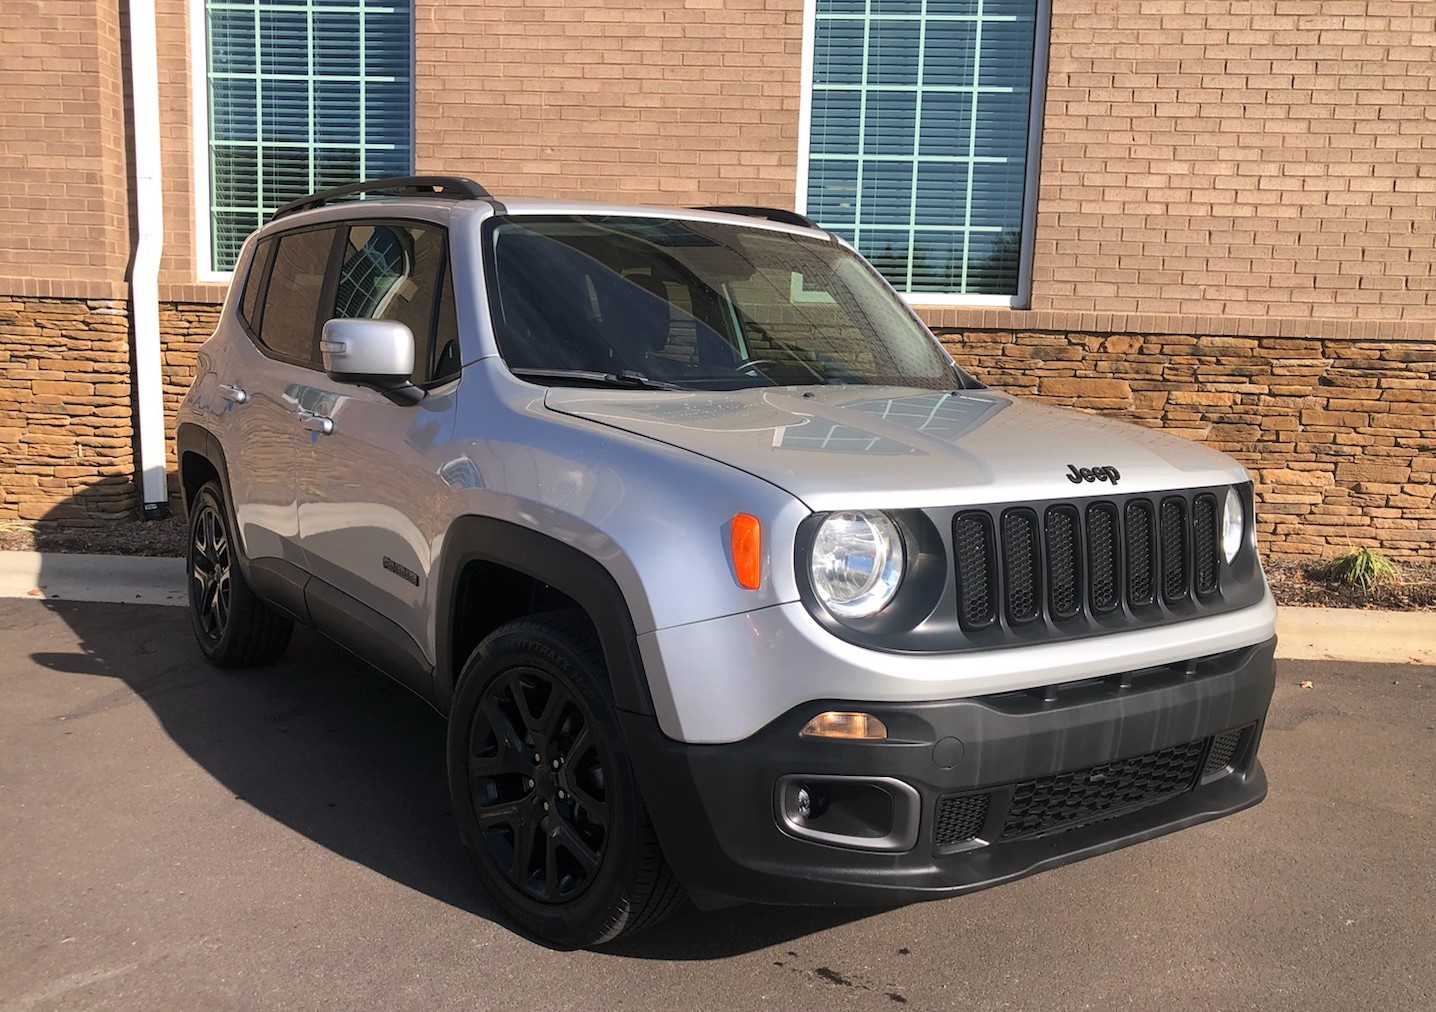 2017 JEEP RENEGADE 4WD  $18,900  VIN:   ZACCJBBB9HPE77326 Mileage: 93,012  Features:     Utility 4D Latitude, 2.4L I4, Automatic Transmission, A/C, Power Seats, Windows, Locks and Mirrors, Tilt, Cruise, AM/FM/MP3 Stereo, Back up Camera Navigation System, Alloy Wheels.